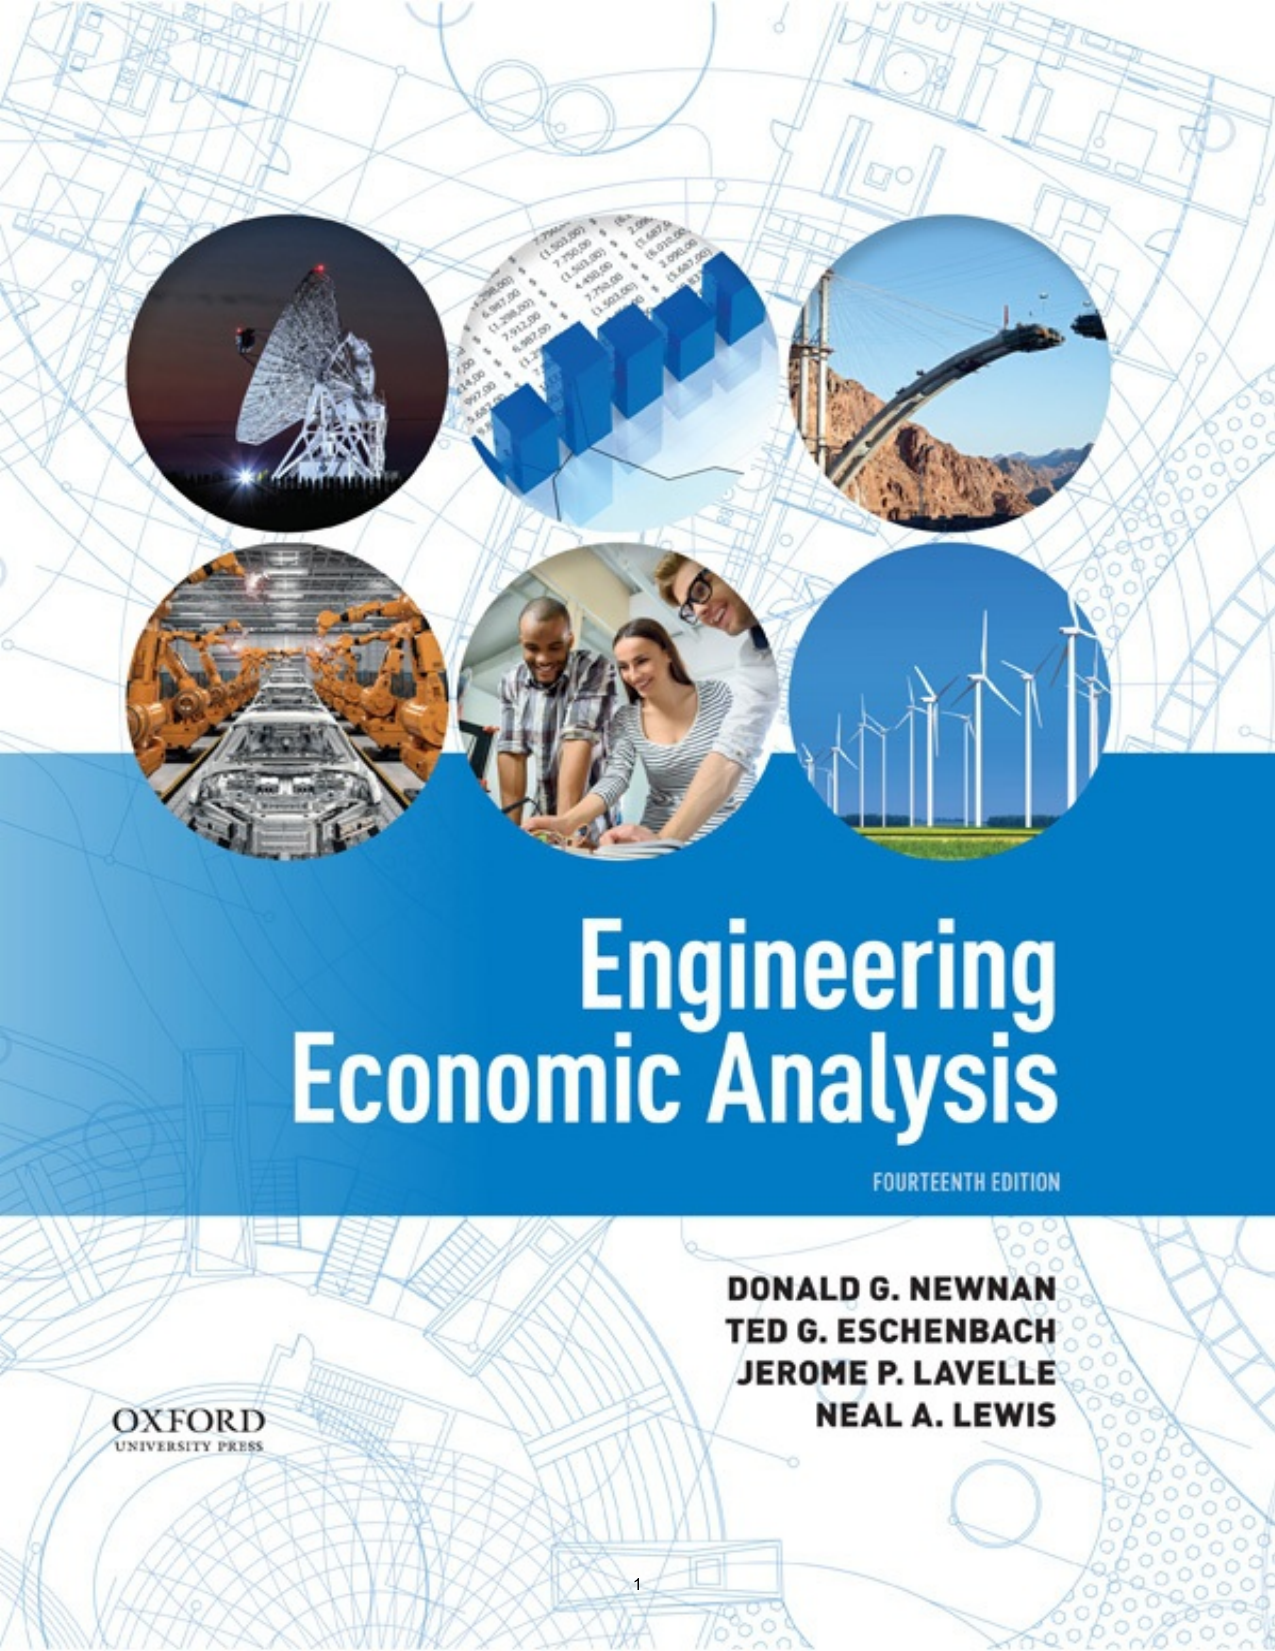 Engineering economic analysis 14th edition pdf free download how to download music for free